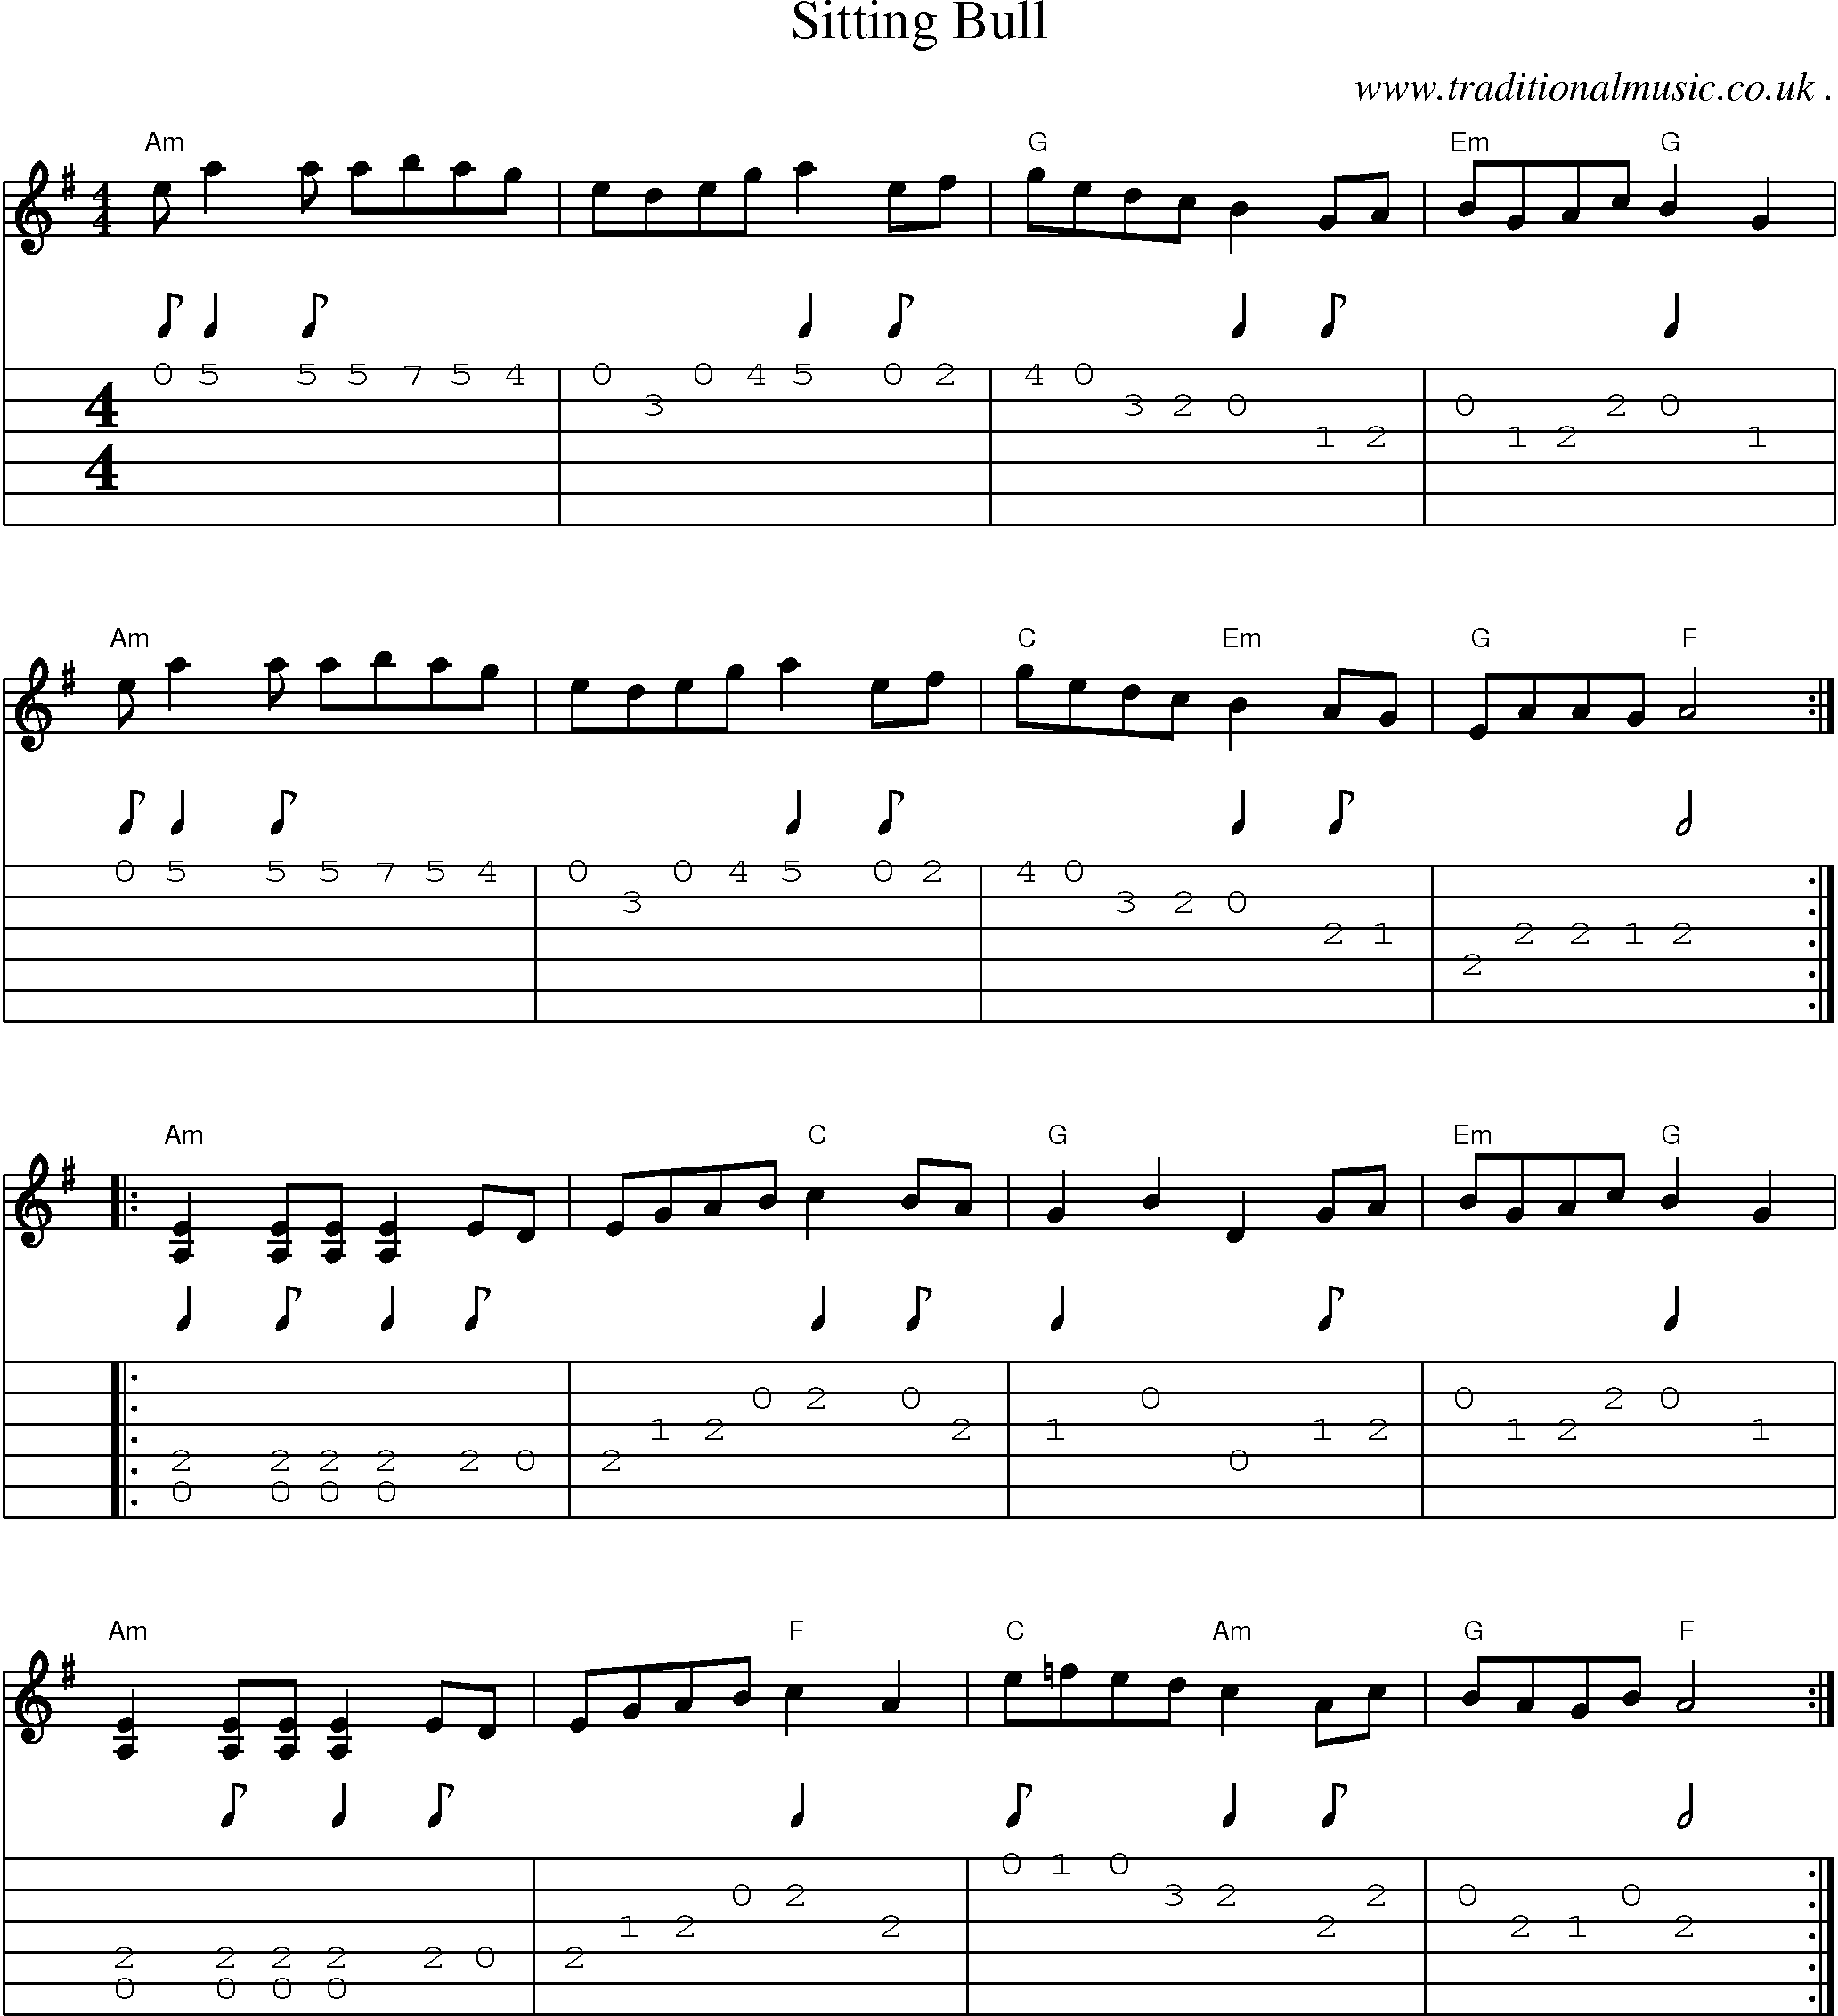 Music Score and Guitar Tabs for Sitting Bull